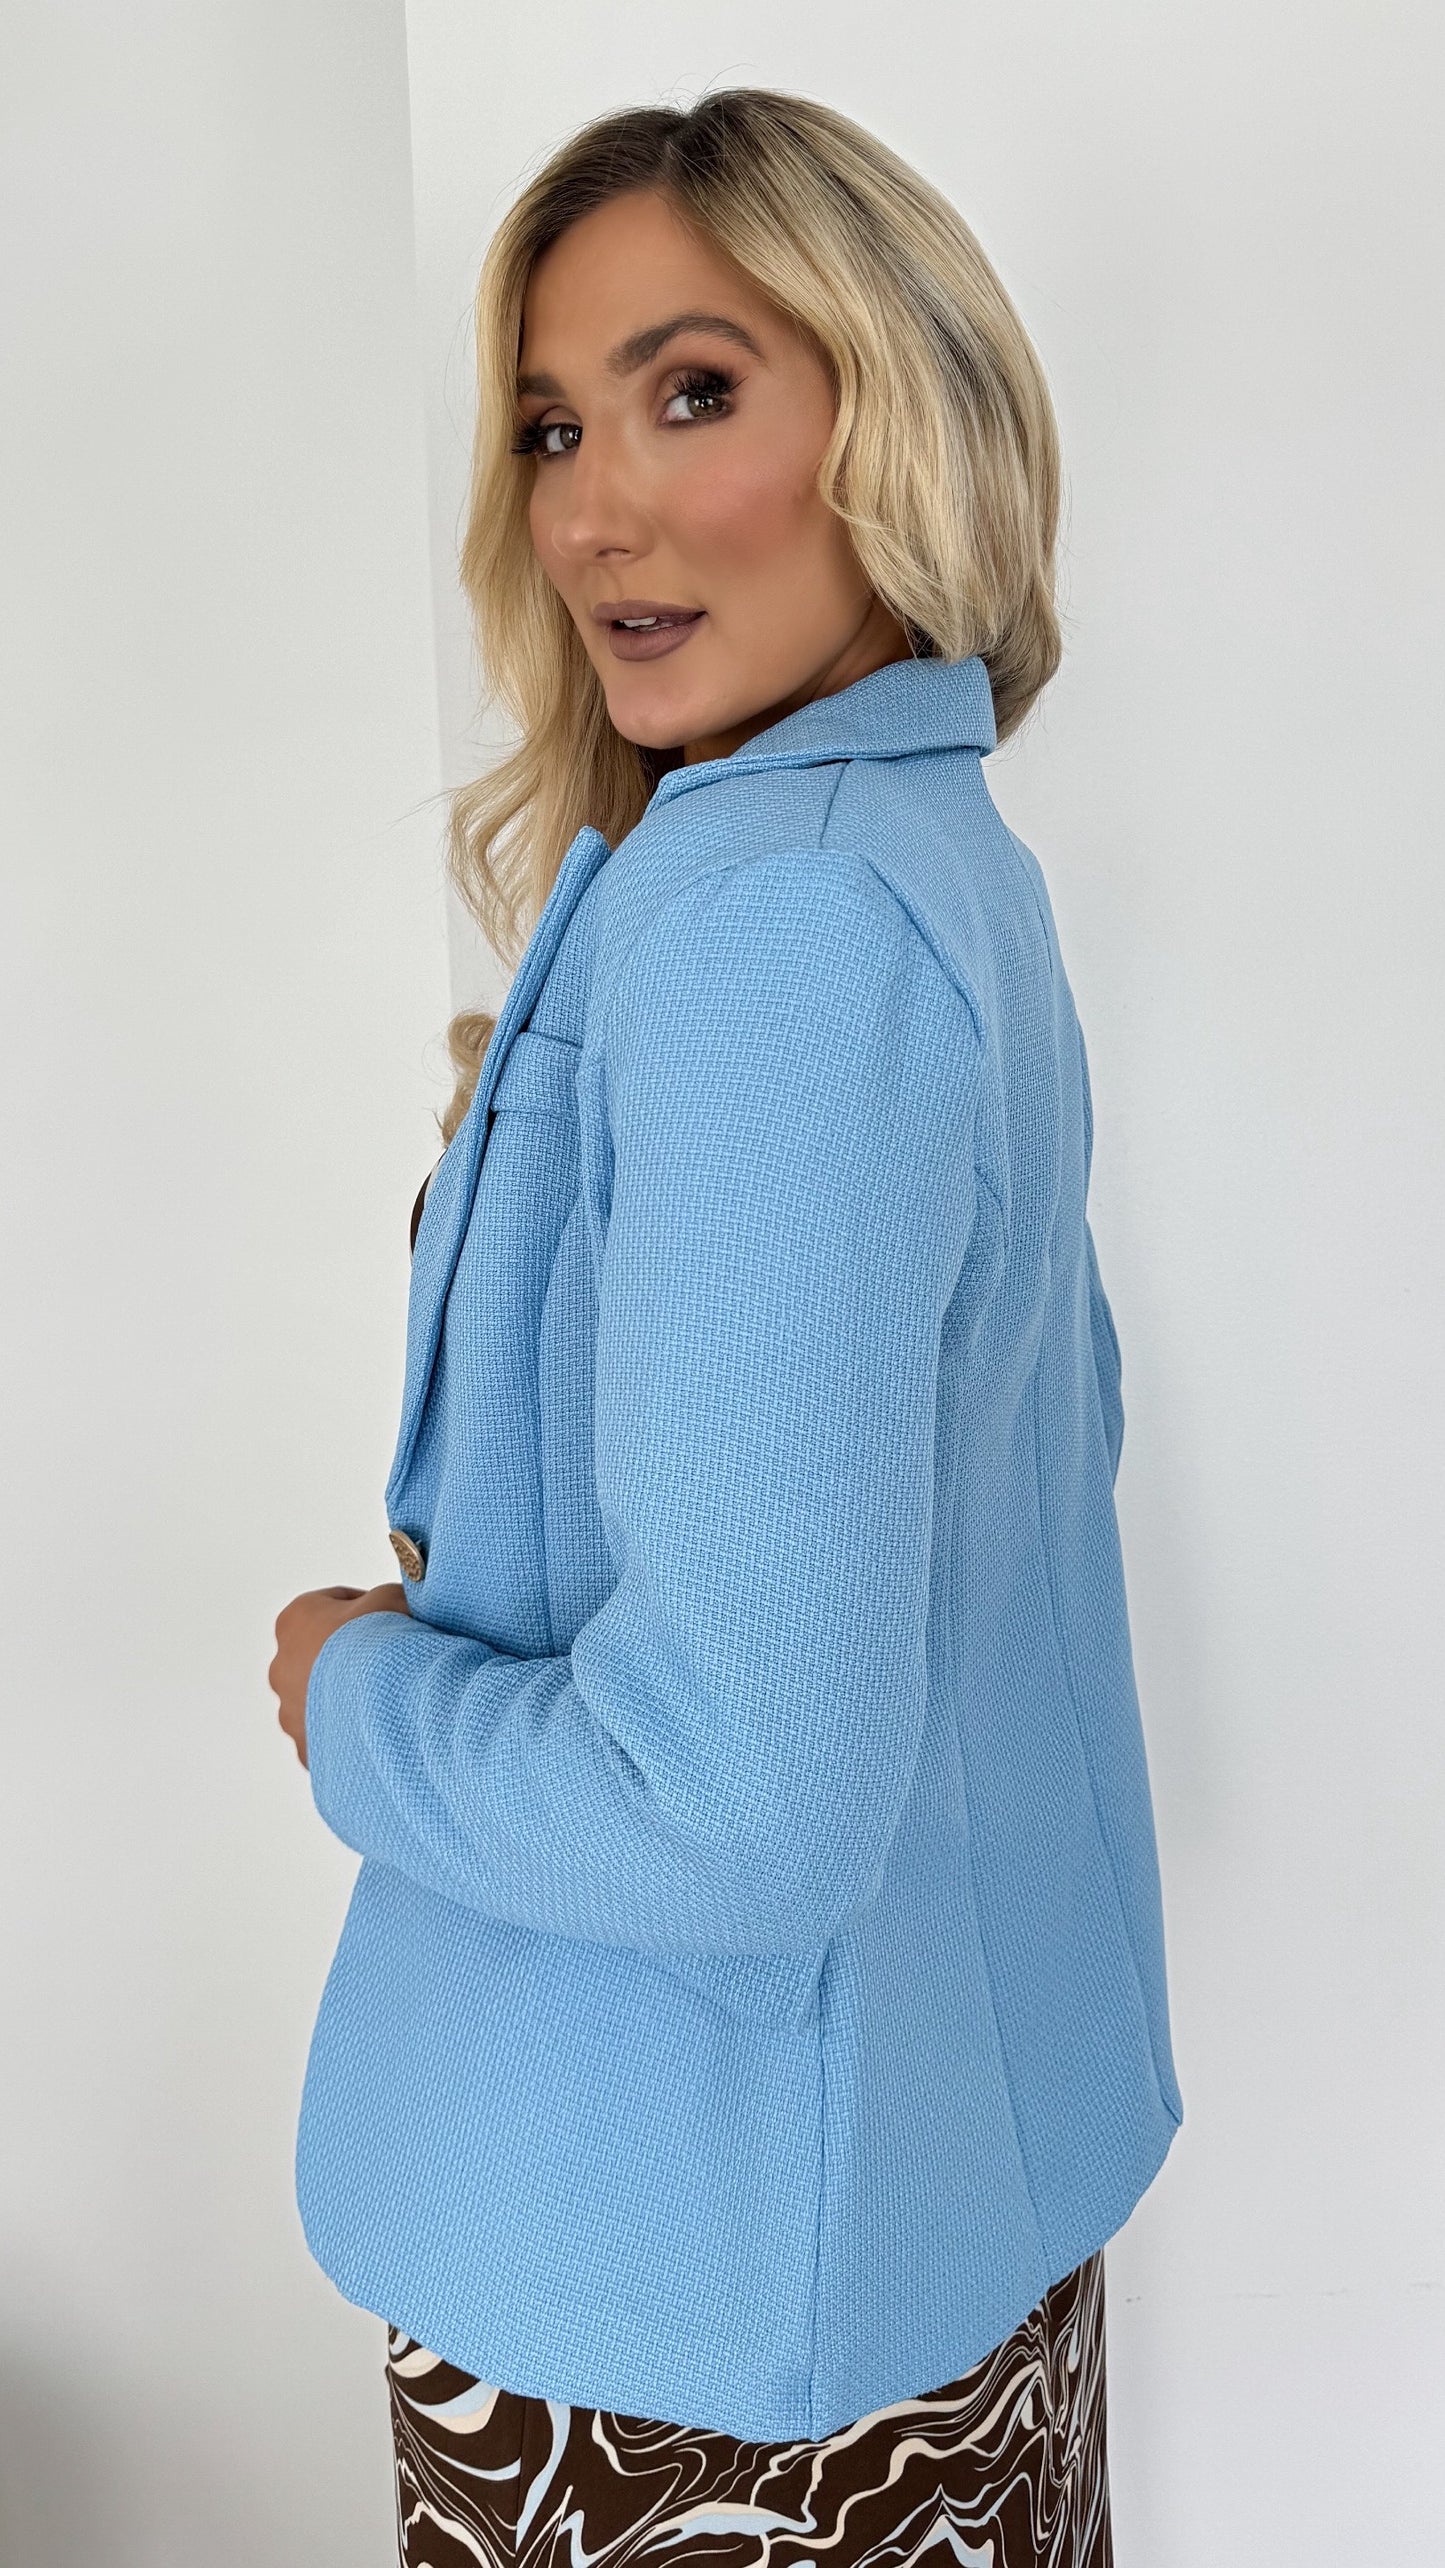 Sonya Single Breasted Blazer with Gold Button - Sky Blue